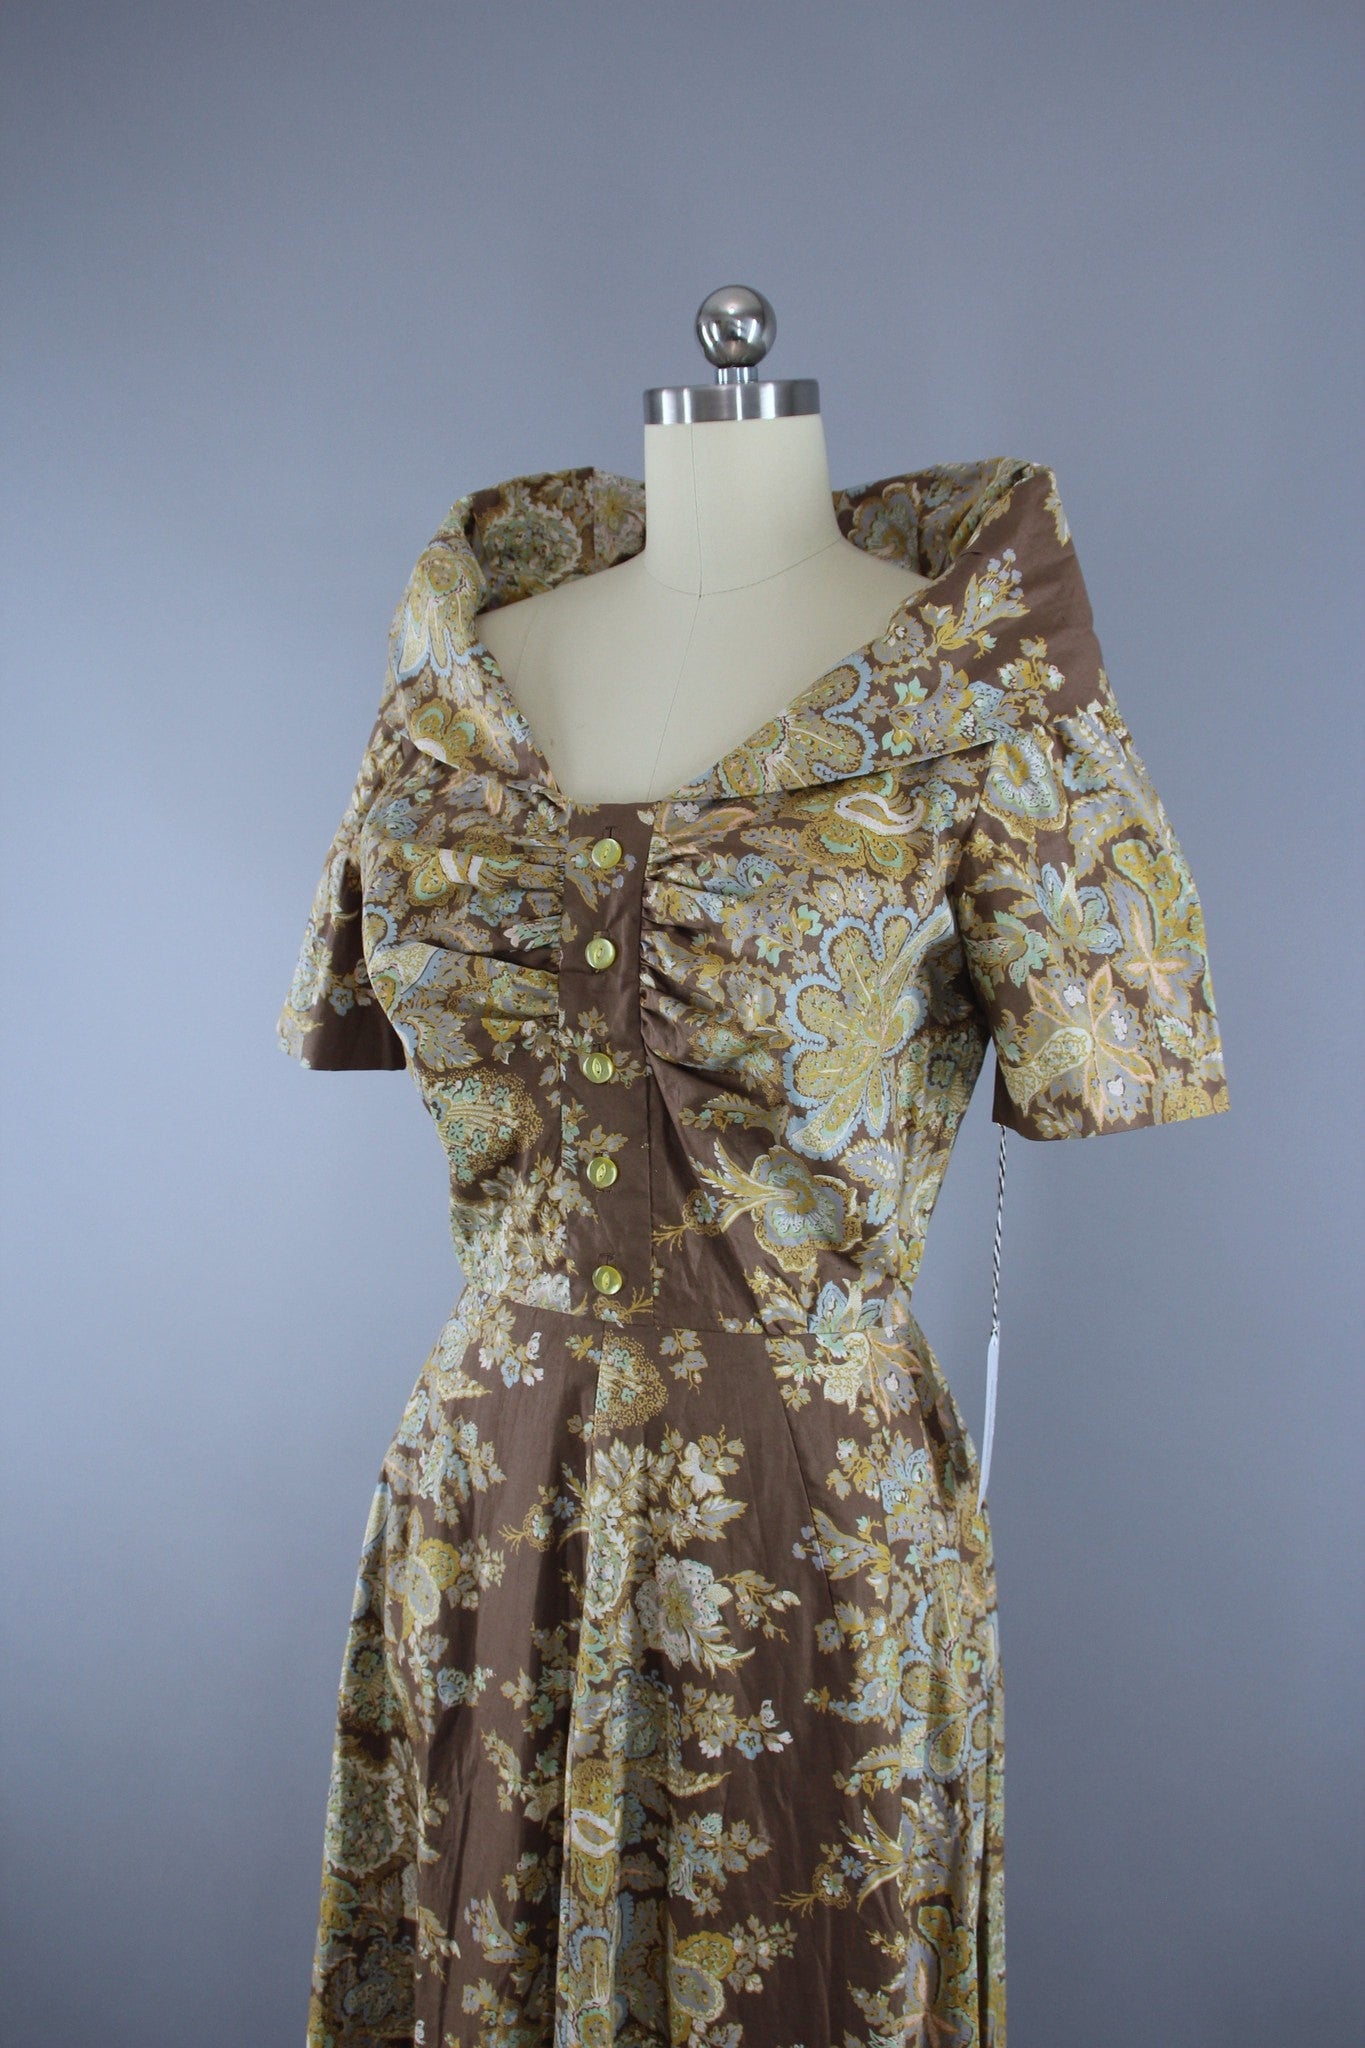 Vintage 1950s New Look Garden Party Dress in Brown & Blue Floral Print - ThisBlueBird